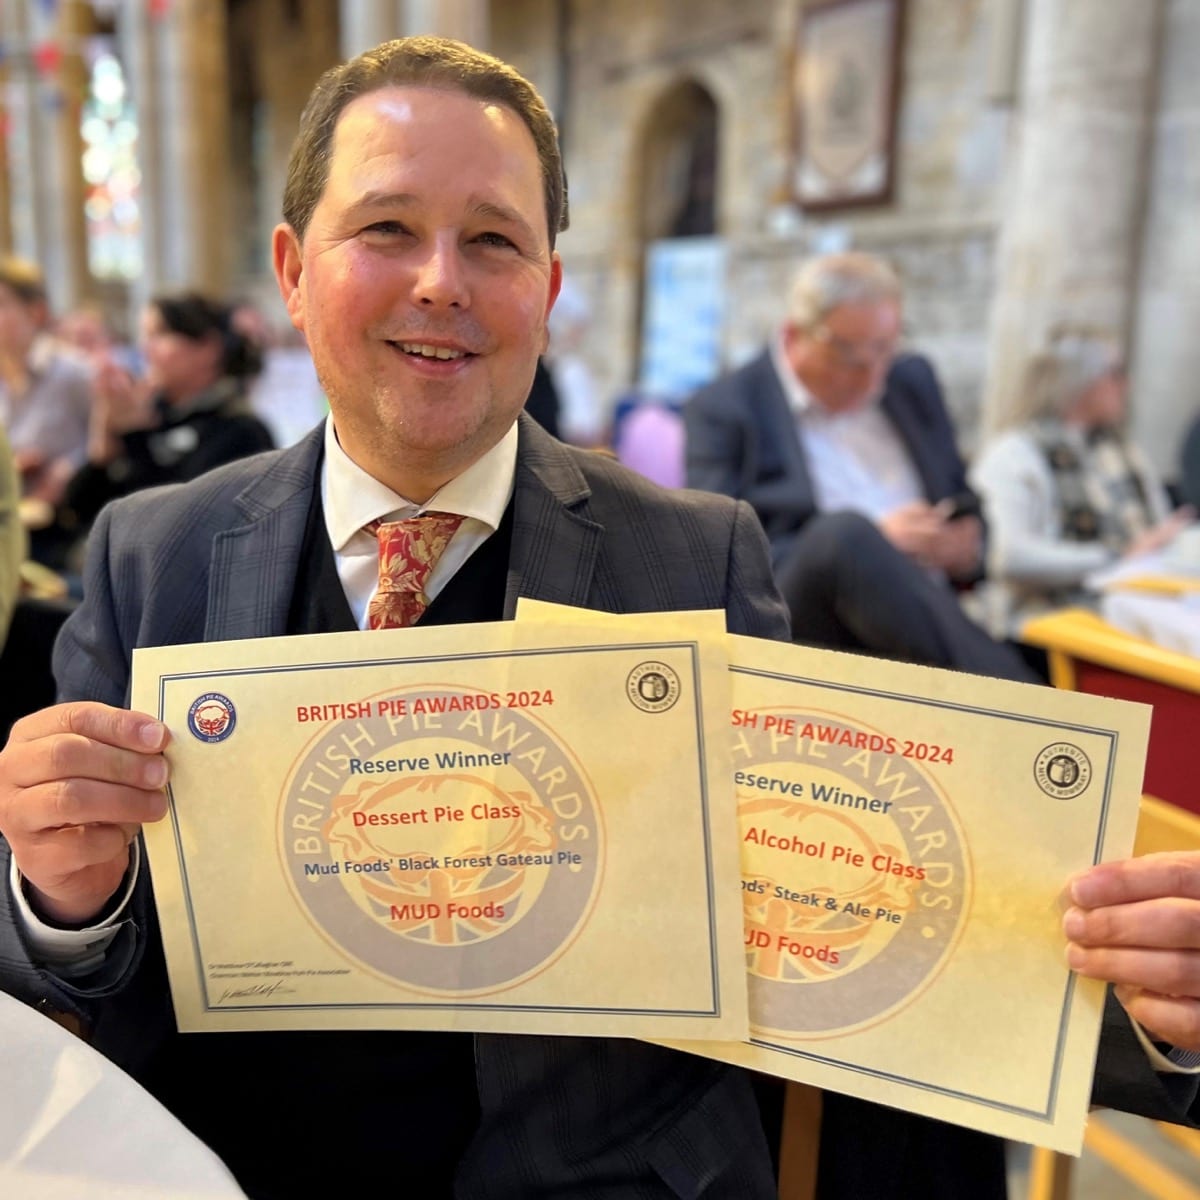 Christian with two certificates from the British Pie Awards